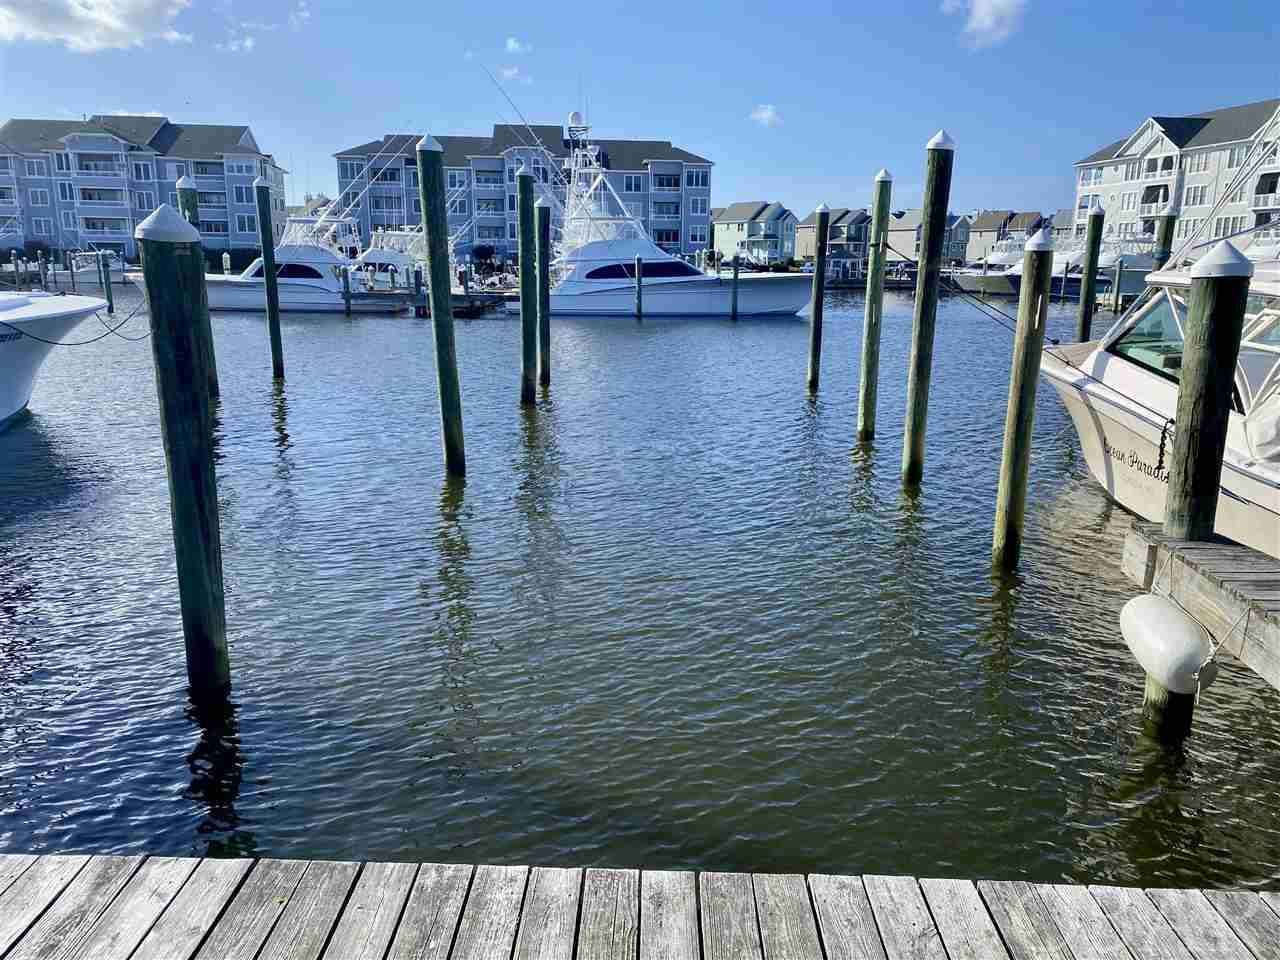 Slip 191 in Pirates Cove Marina is 75' X 20'. Located on G dock, Slip 191 will accommodate up to a 80FT boat. Electricity and parking are available and water is included, as well as bath house and fish cleaning station access. Pirate's Cove is home to Blue Water Bar & Grill Restaurant, seasonal tiki bar and a marina store.  A per day amenity fee of $5.00 provides access to community amenities including:   swimming pool, clubhouse, tennis courts, fitness center, and playground.